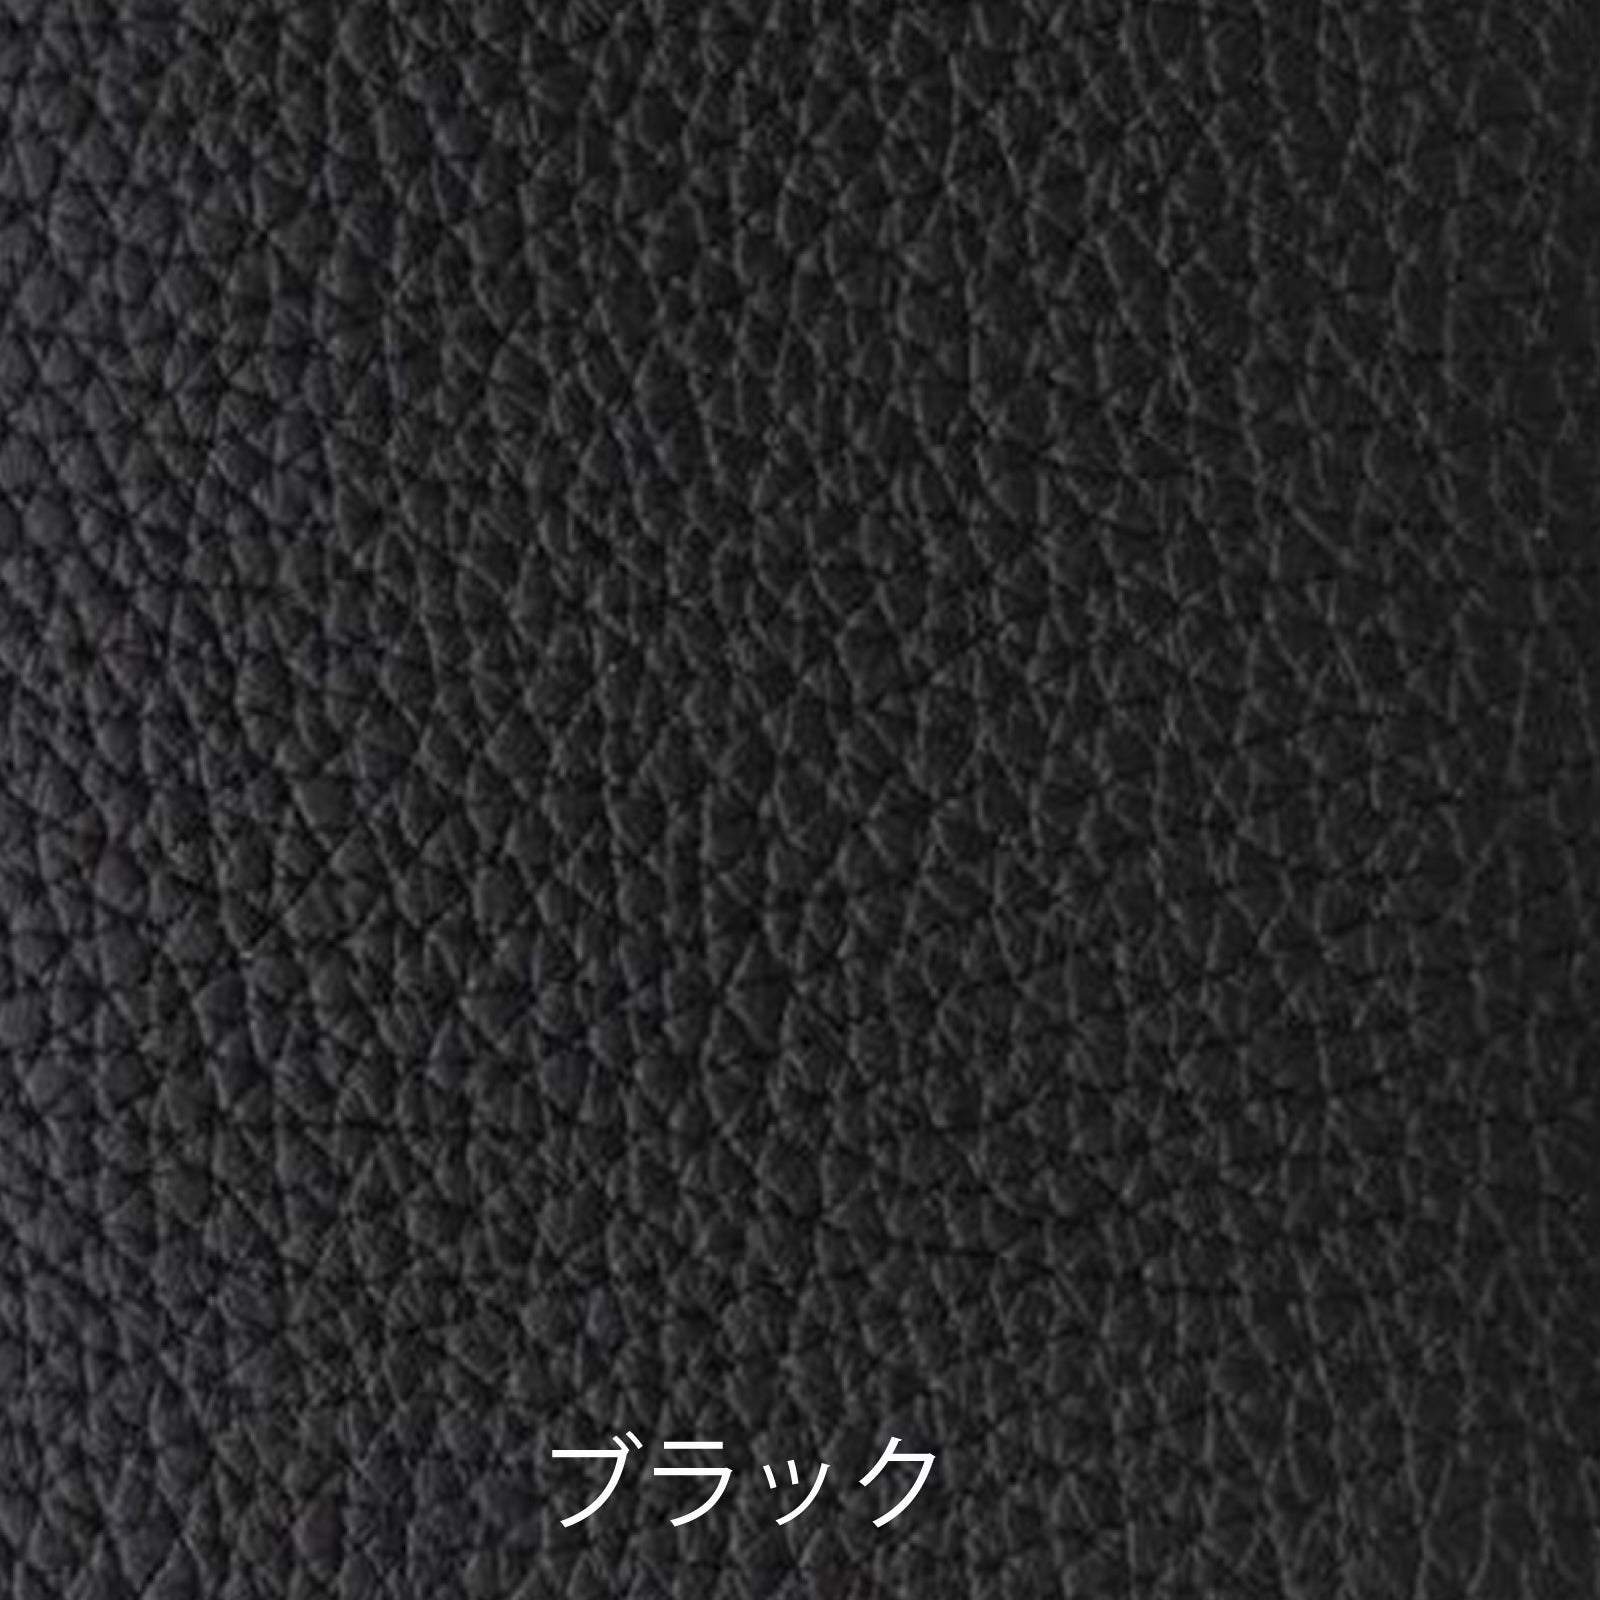 [Color order] B6 size notebook cover Taurillon Clemence x Cuir Mash 